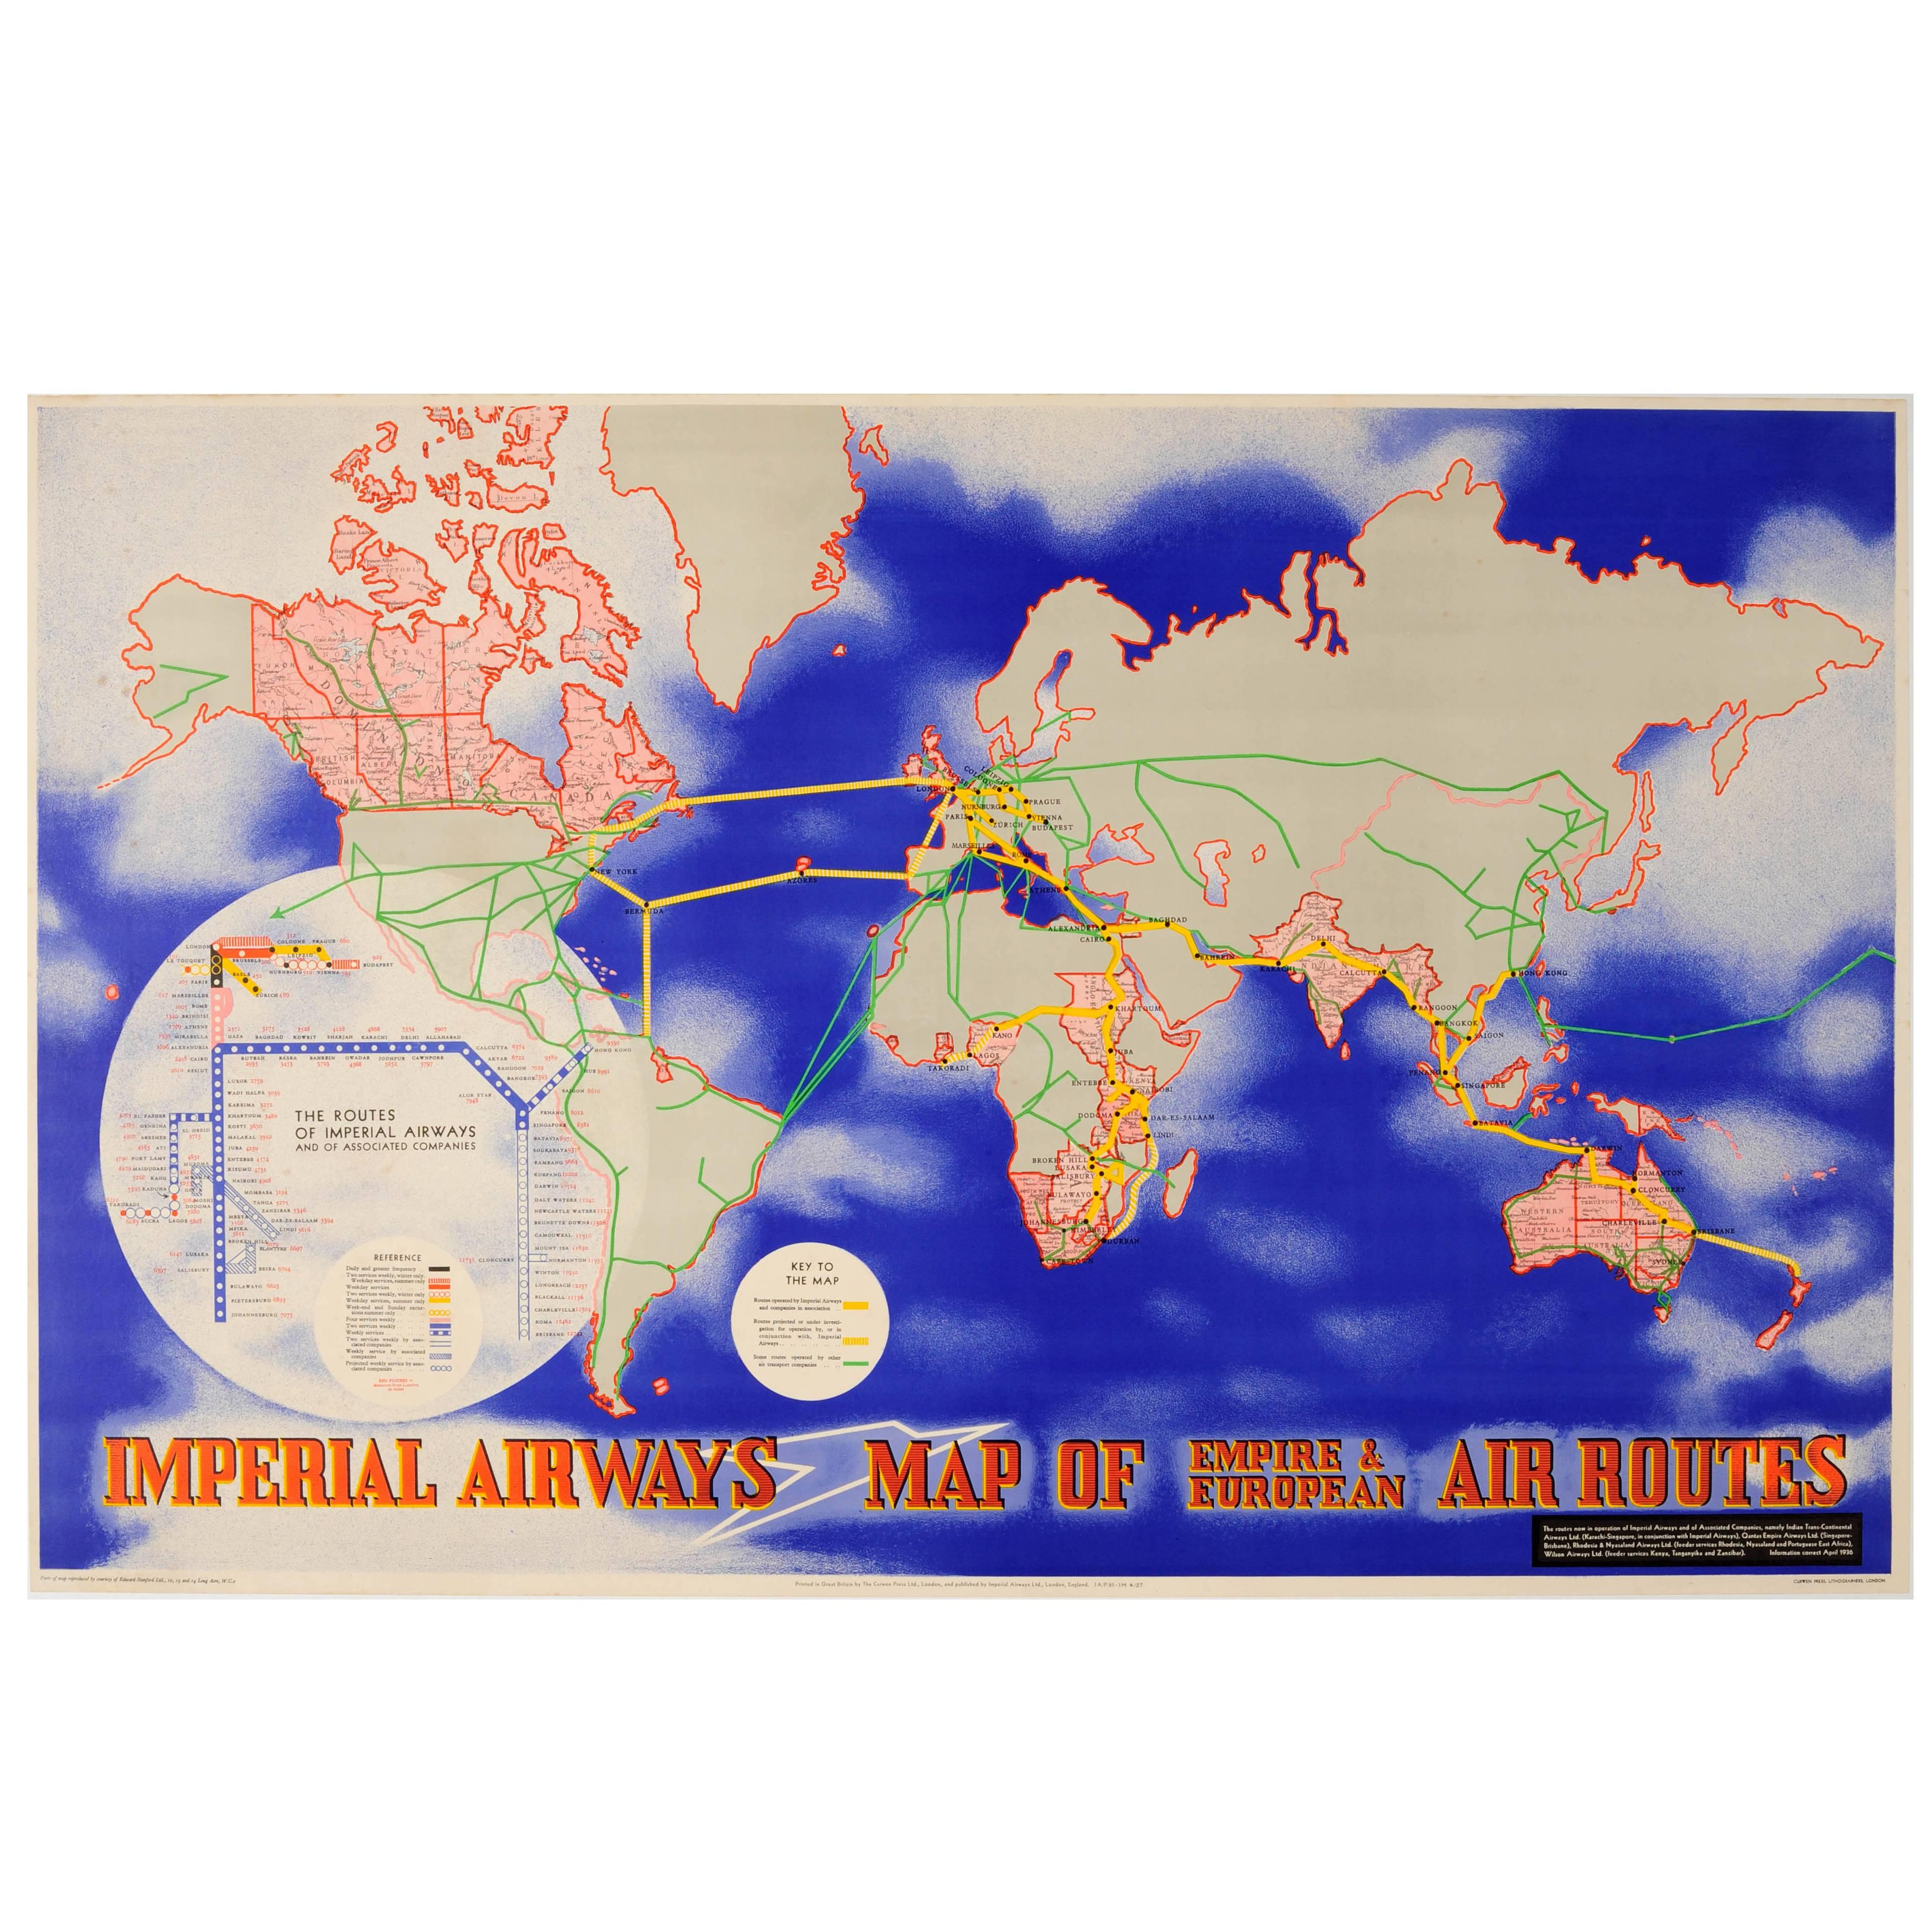 Original Vintage Imperial Airways Poster - Map Of Empire And European Air Routes